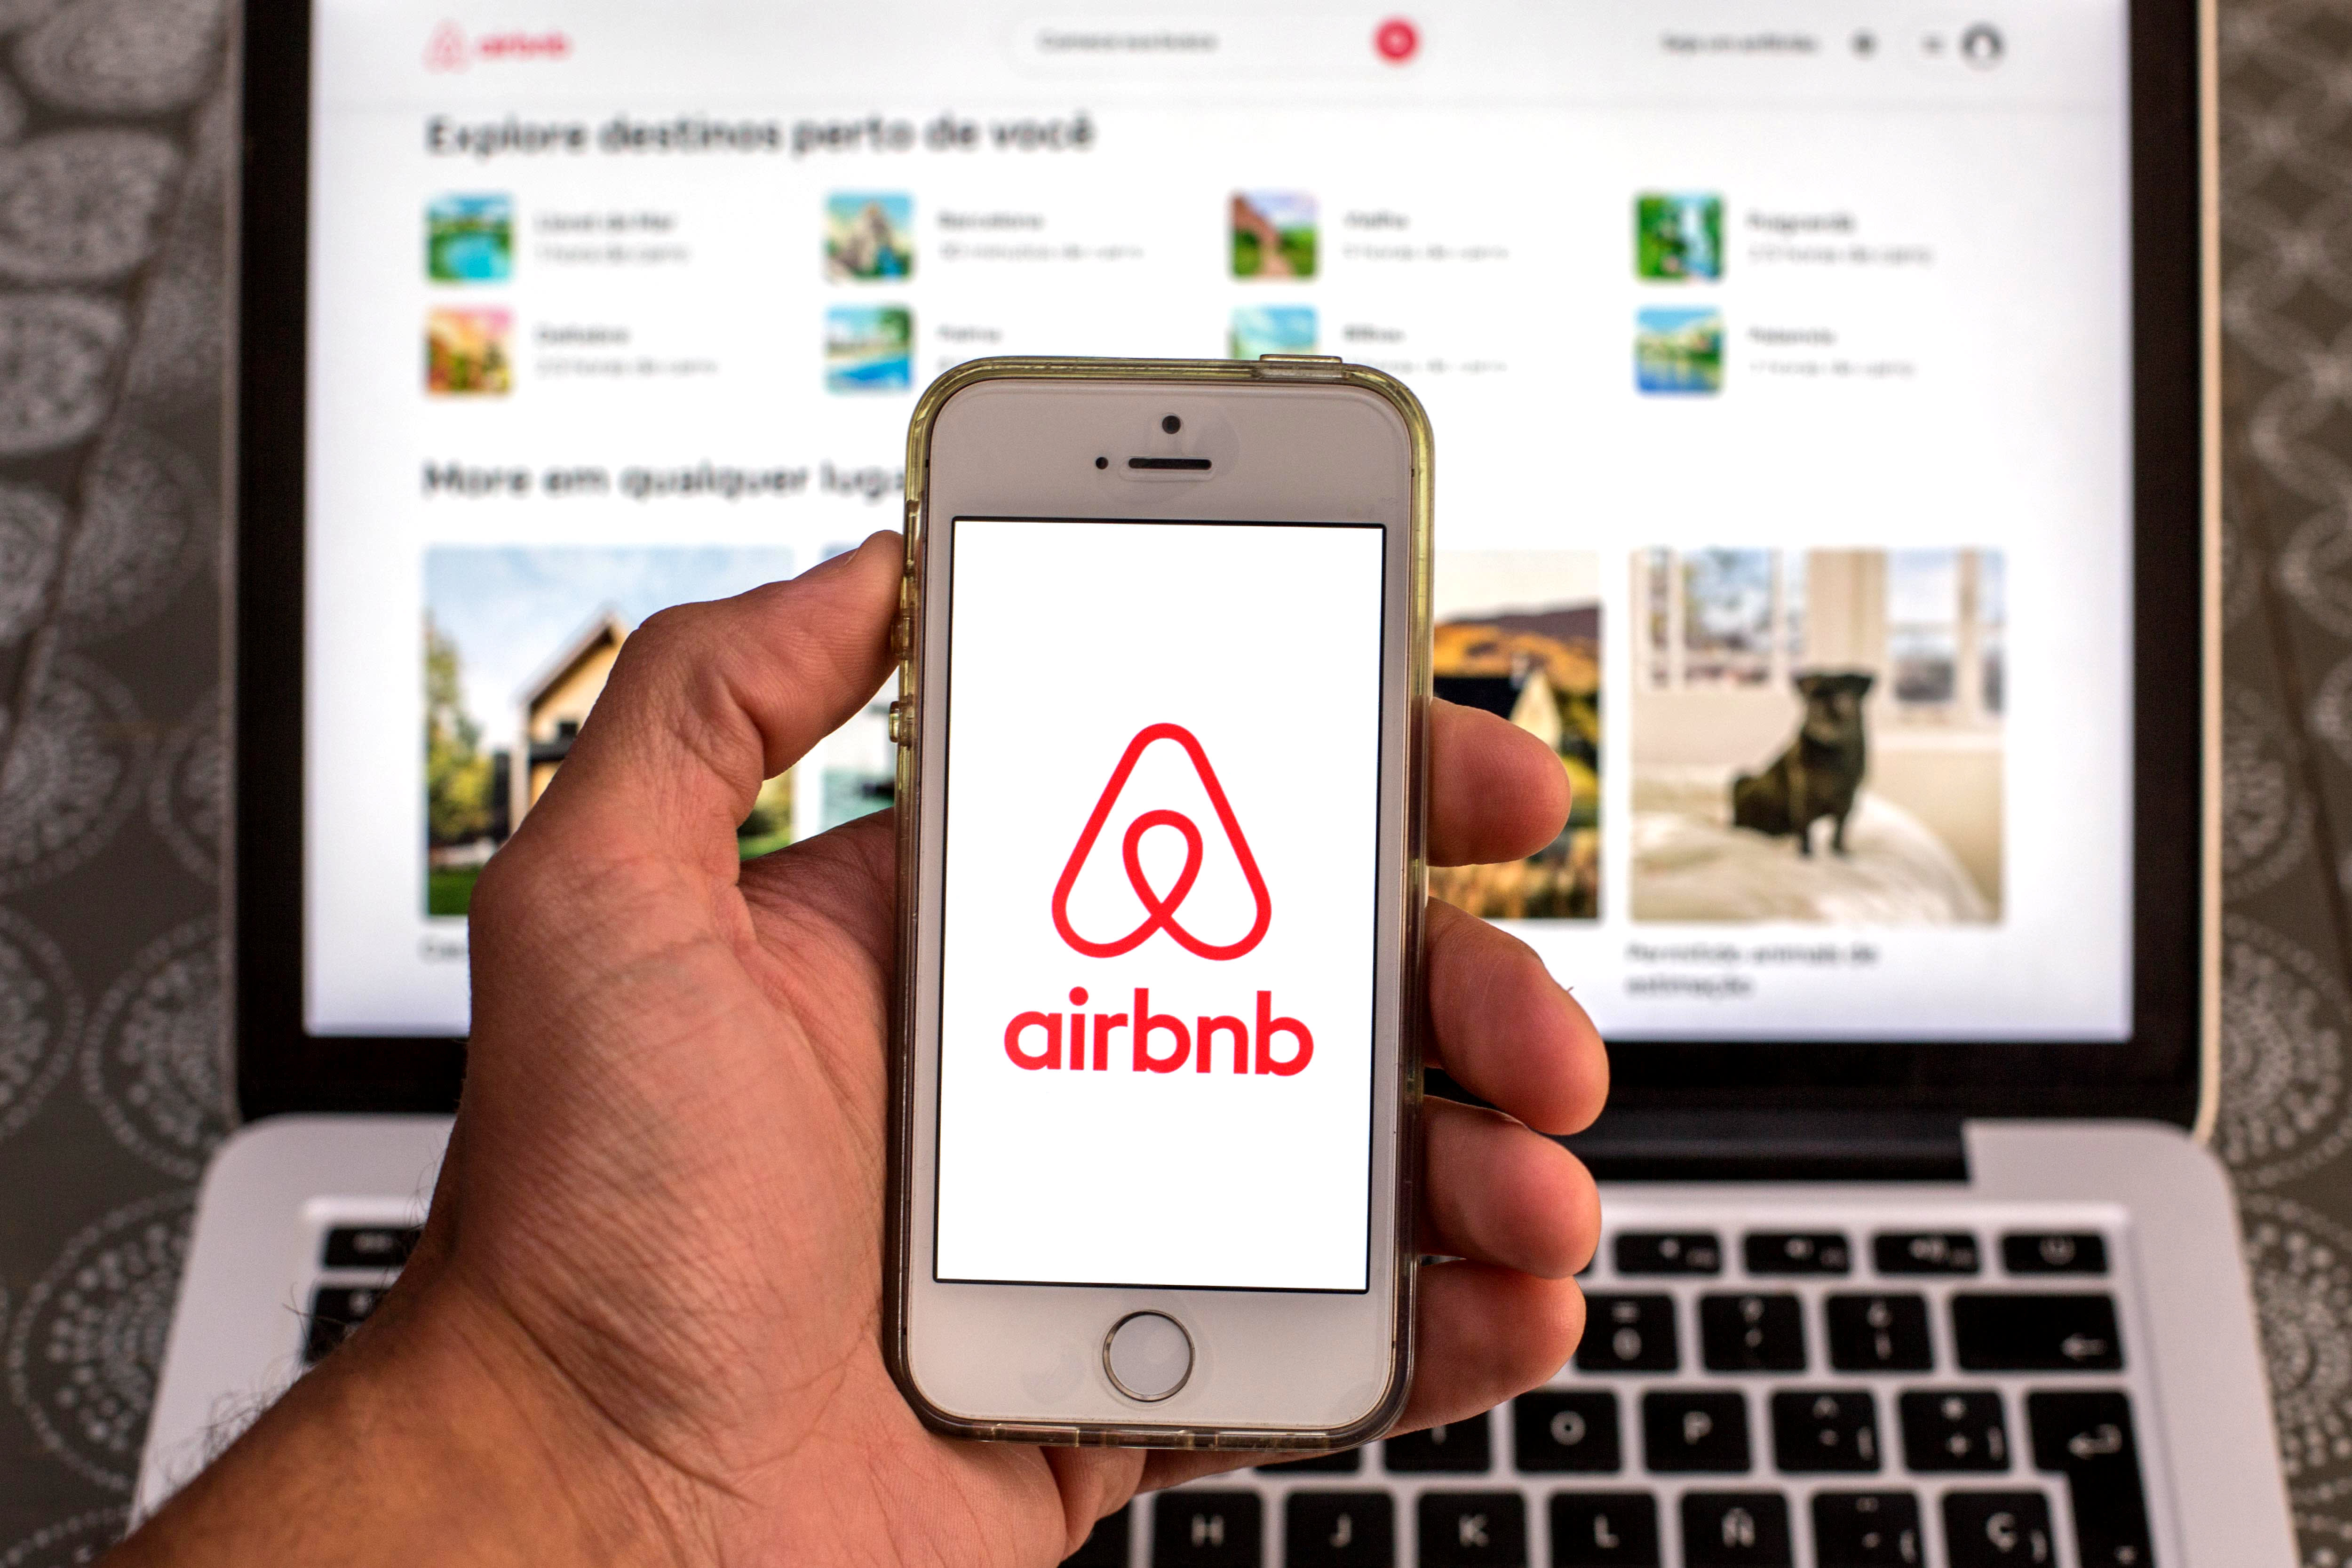 Airbnb is a buy as it could soon become the biggest Western travel company, Bernstein says